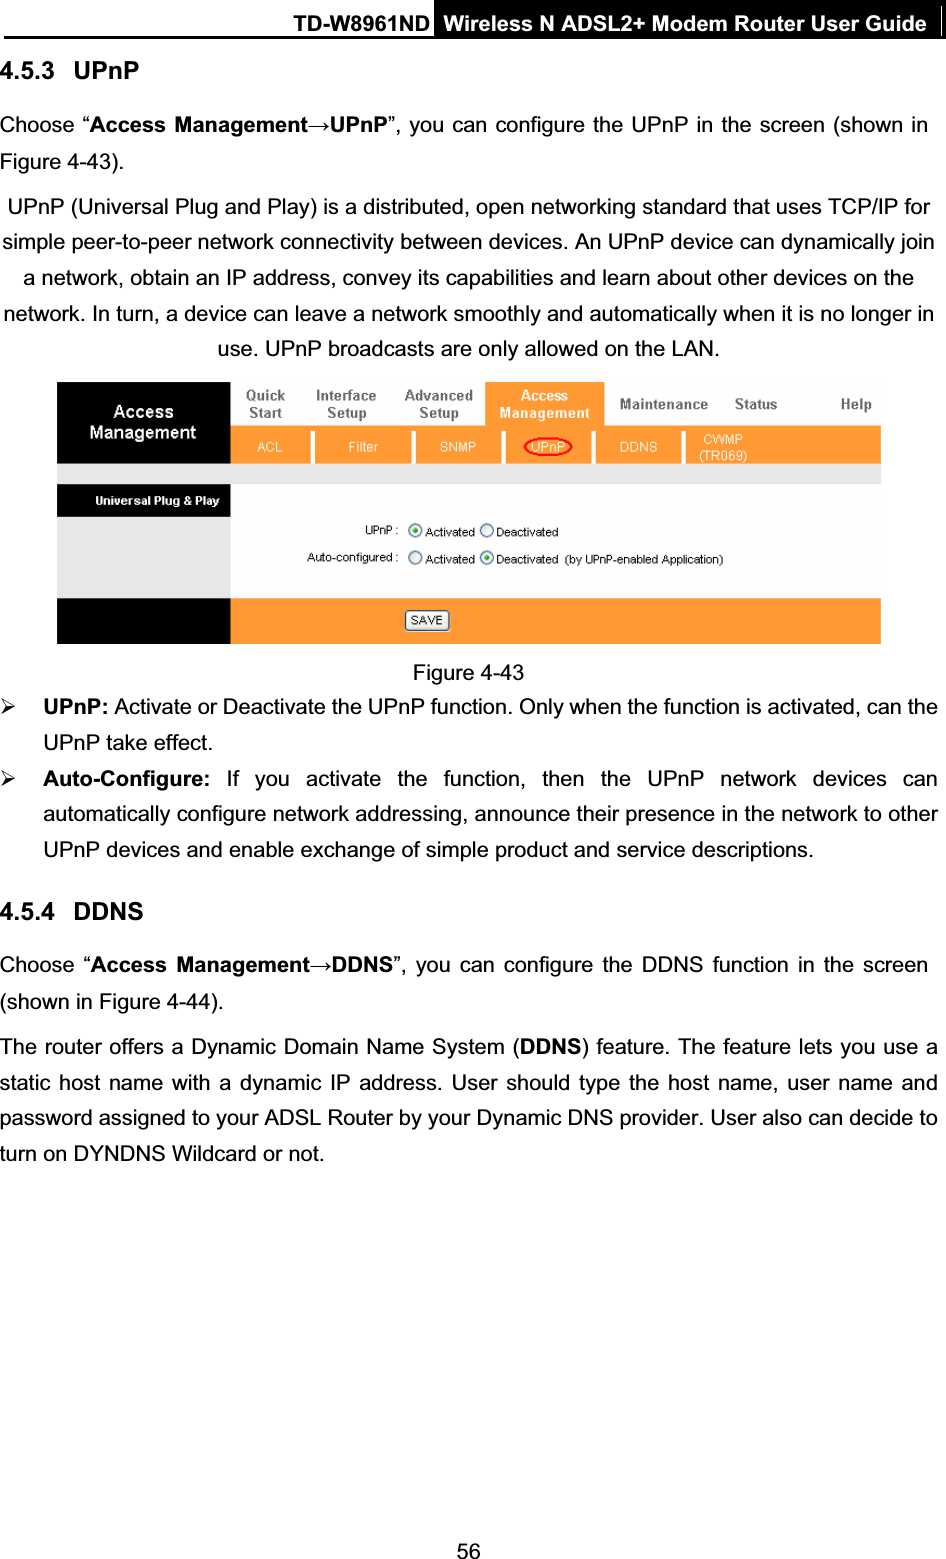 TD-W8961ND Wireless N ADSL2+ Modem Router User Guide564.5.3 UPnPChoose “Access ManagementĺUPnP”, you can configure the UPnP in the screen (shown in Figure 4-43). UPnP (Universal Plug and Play) is a distributed, open networking standard that uses TCP/IP for simple peer-to-peer network connectivity between devices. An UPnP device can dynamically join a network, obtain an IP address, convey its capabilities and learn about other devices on the network. In turn, a device can leave a network smoothly and automatically when it is no longer in use. UPnP broadcasts are only allowed on the LAN. Figure 4-43 ¾UPnP: Activate or Deactivate the UPnP function. Only when the function is activated, can the UPnP take effect. ¾Auto-Configure: If you activate the function, then the UPnP network devices can automatically configure network addressing, announce their presence in the network to other UPnP devices and enable exchange of simple product and service descriptions. 4.5.4 DDNSChoose “Access ManagementĺDDNS”, you can configure the DDNS function in the screen (shown in Figure 4-44).The router offers a Dynamic Domain Name System (DDNS) feature. The feature lets you use a static host name with a dynamic IP address. User should type the host name, user name and password assigned to your ADSL Router by your Dynamic DNS provider. User also can decide to turn on DYNDNS Wildcard or not. 